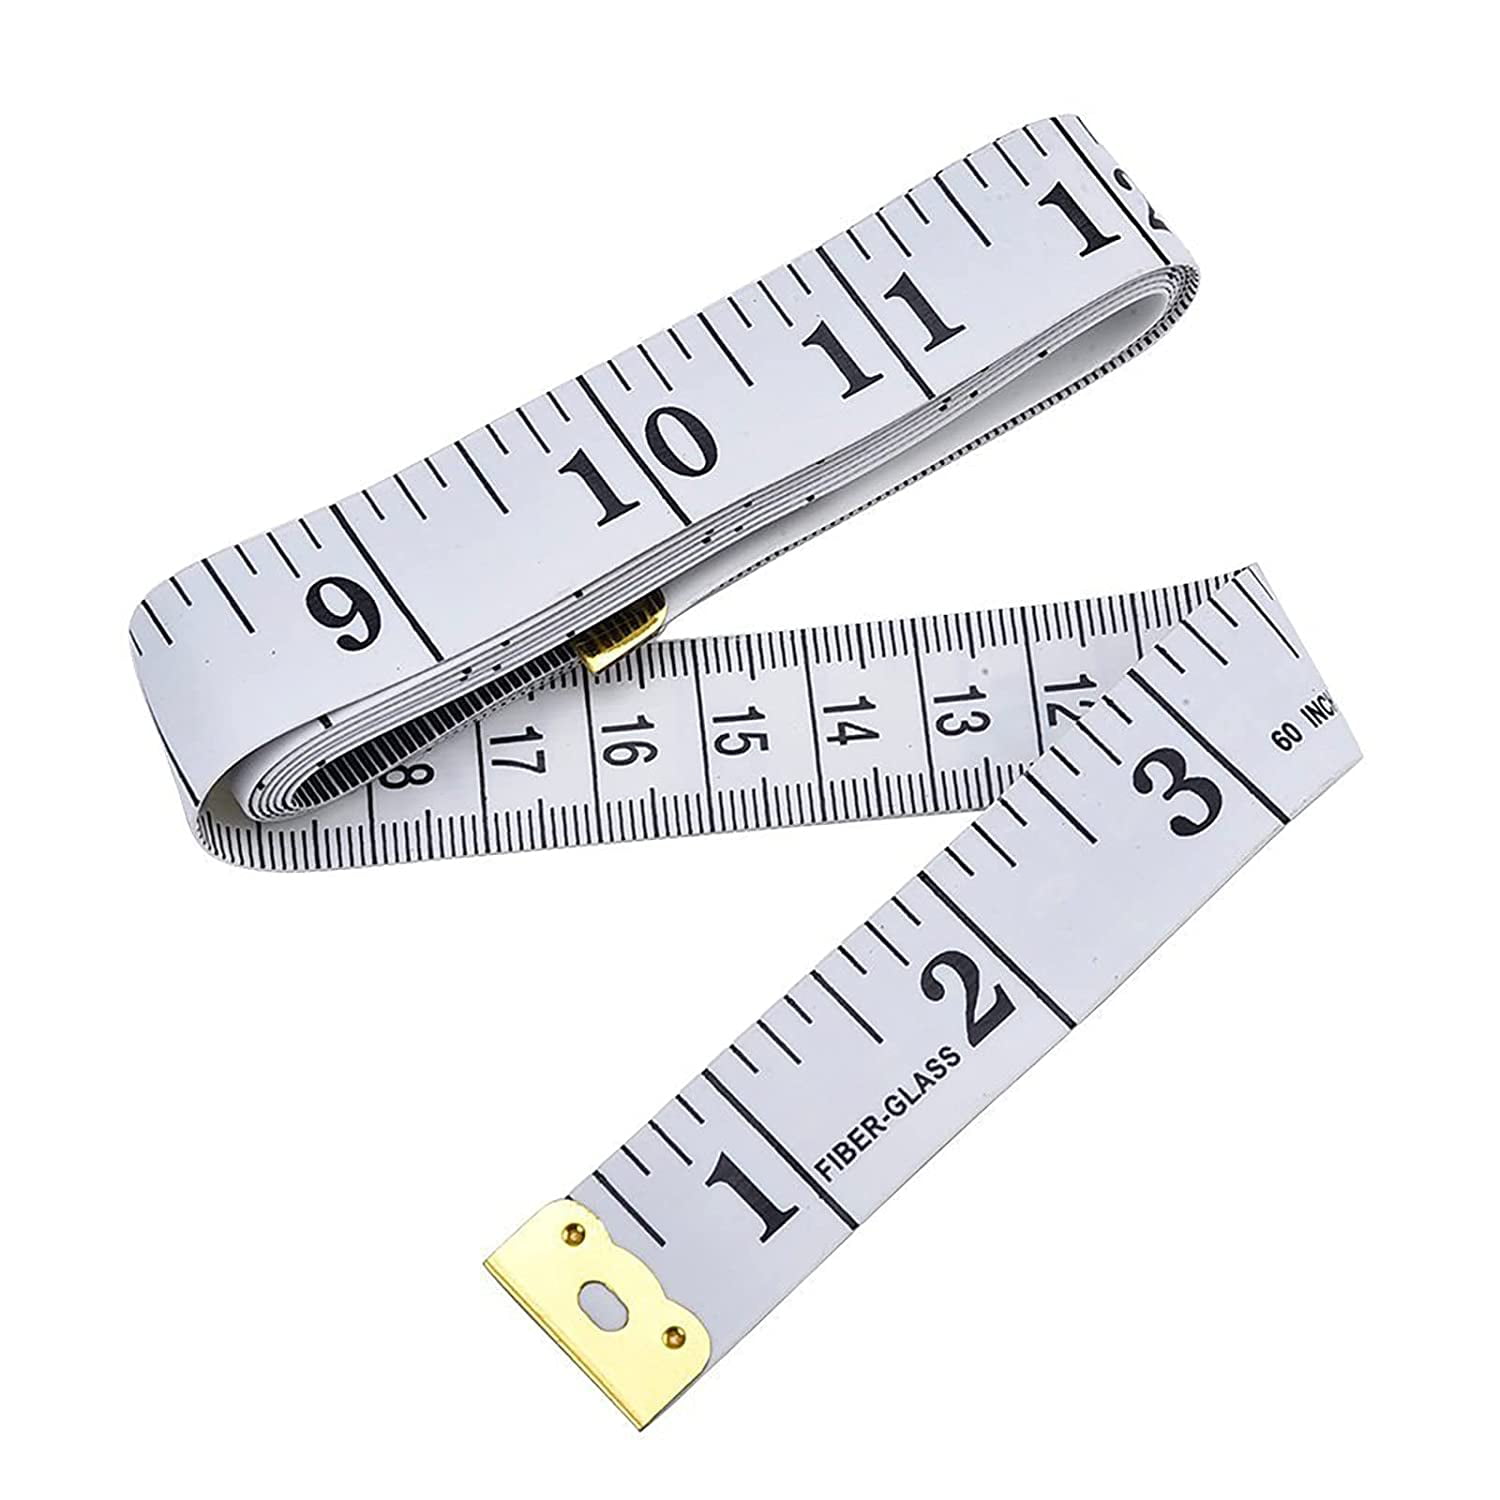 Ruler Loss Tape Ruler Flexible Scale For Weight Double Sewing Soft Body  Measure ArtsCrafts & Sewing Mm Tape Measure Mini